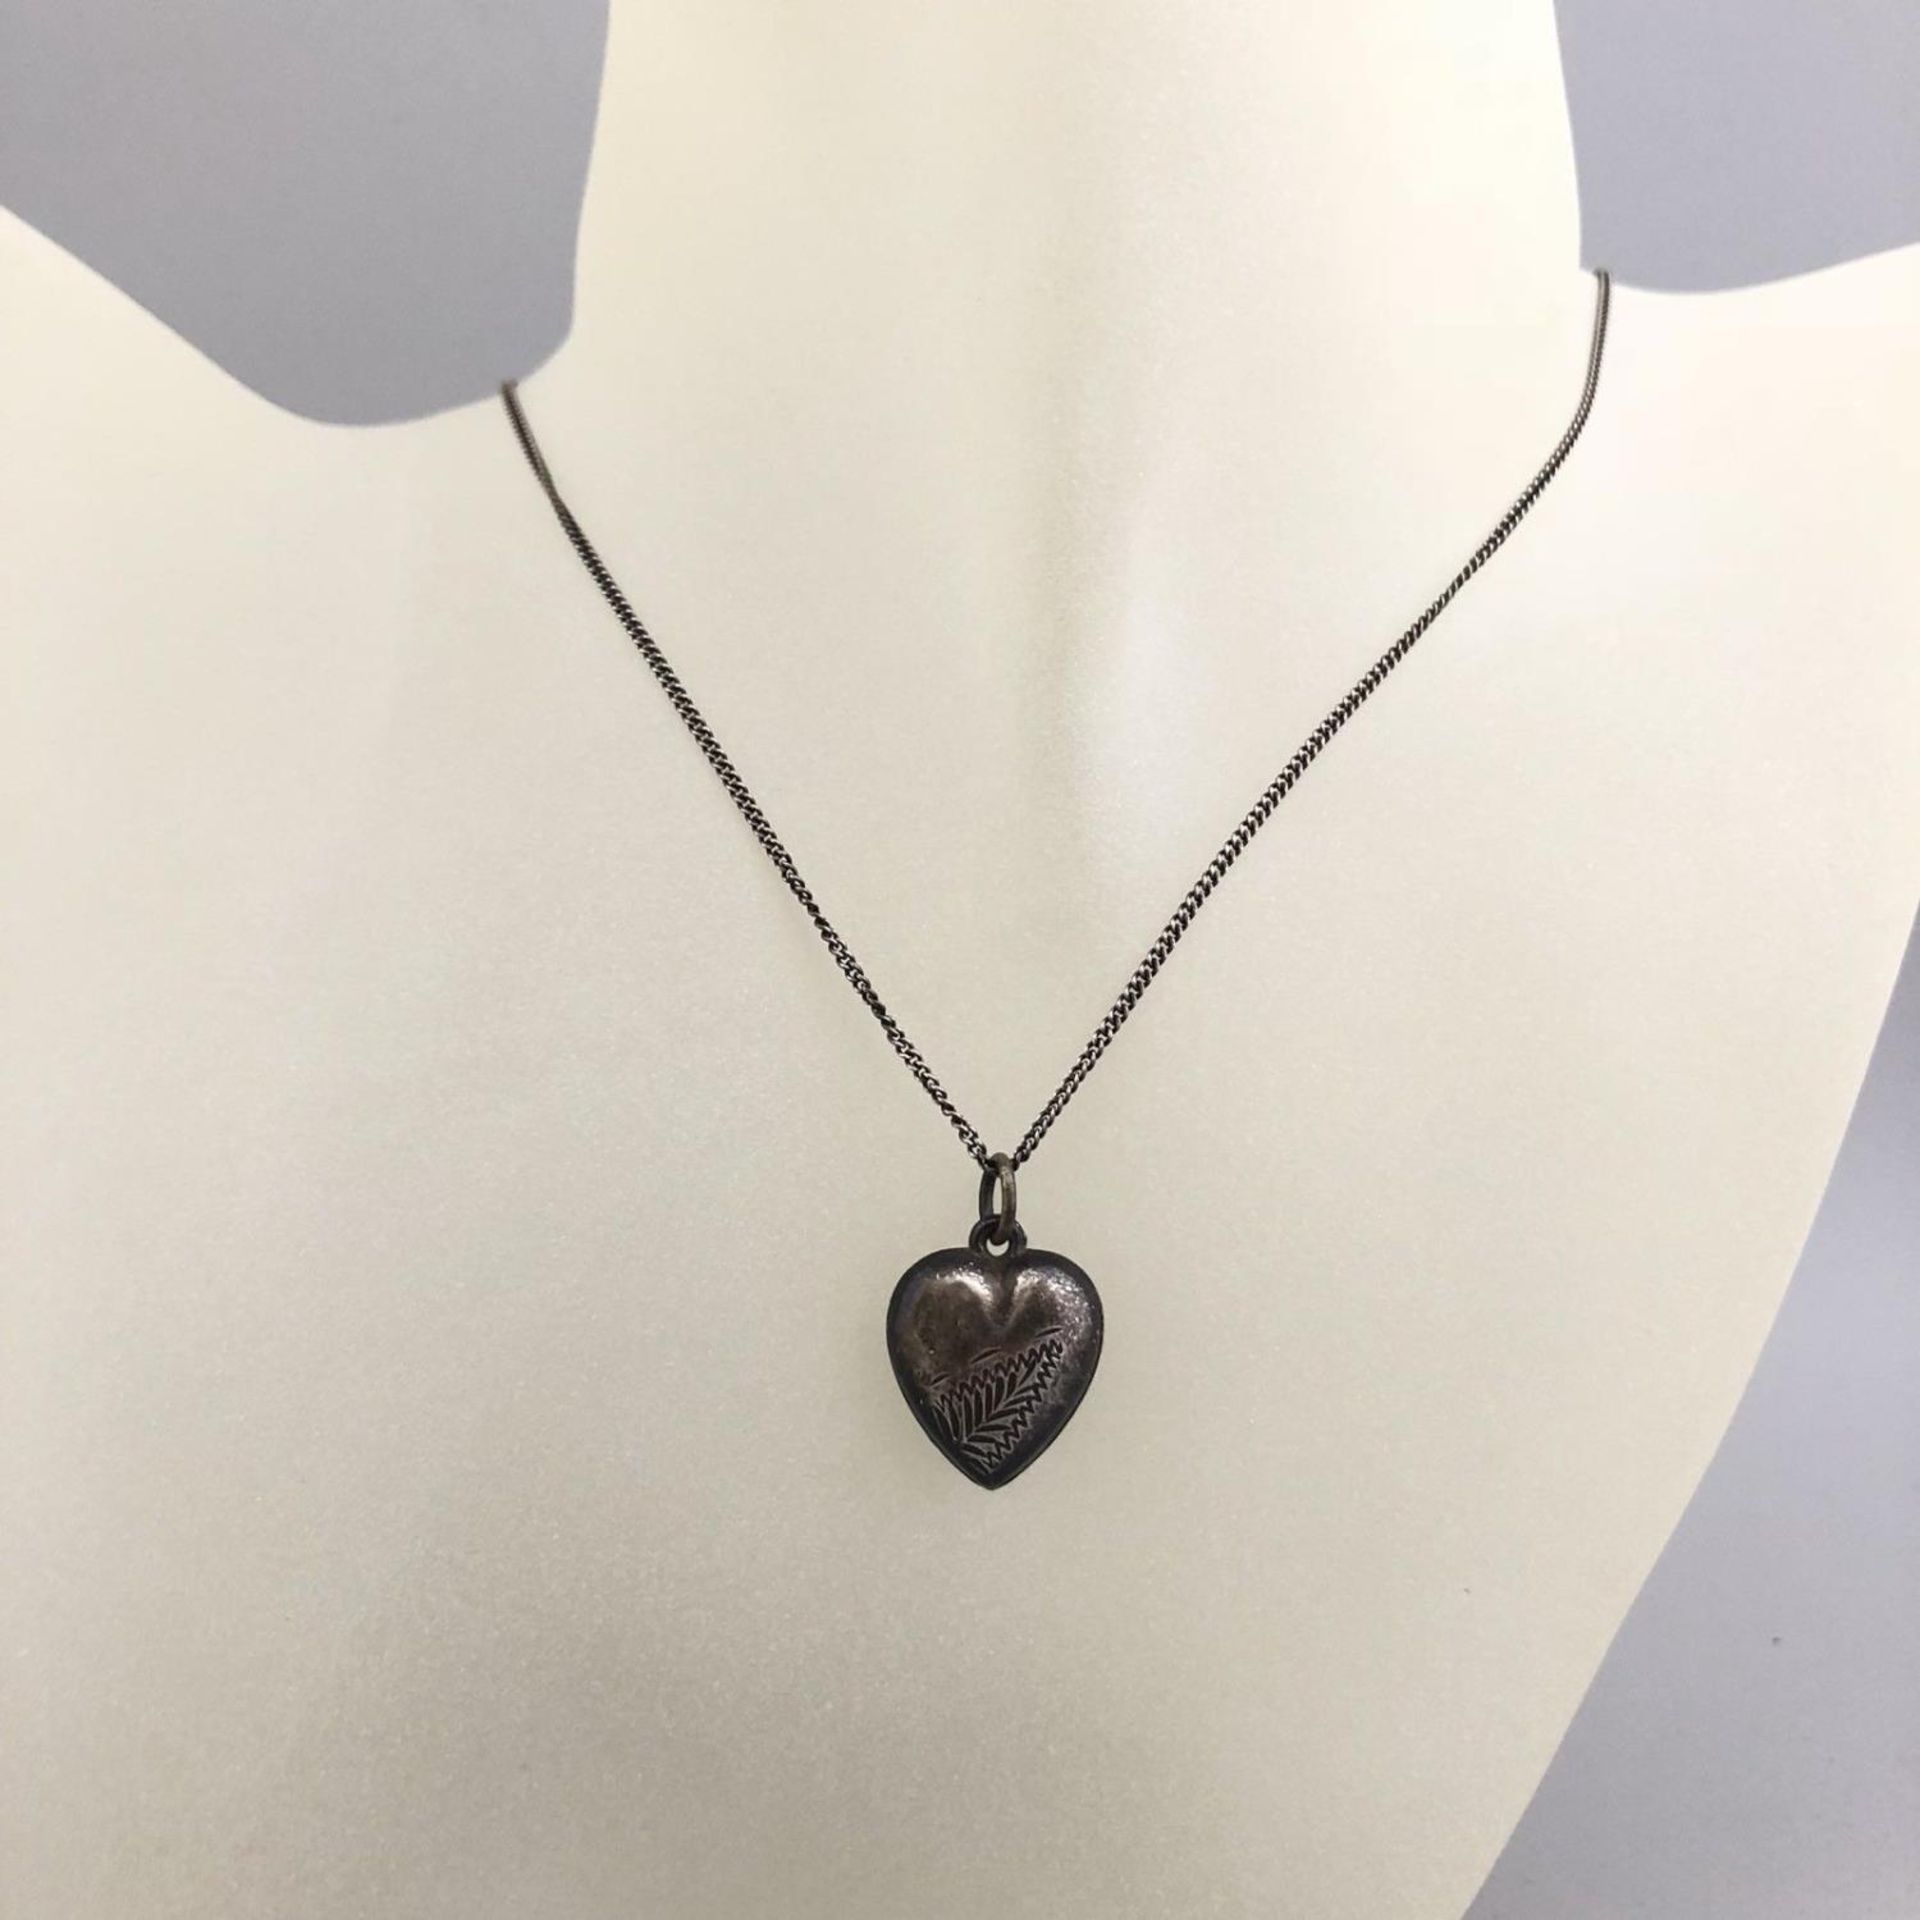 Sterling Silver Heart Pendant on a Long Chain Necklace - Image 2 of 3